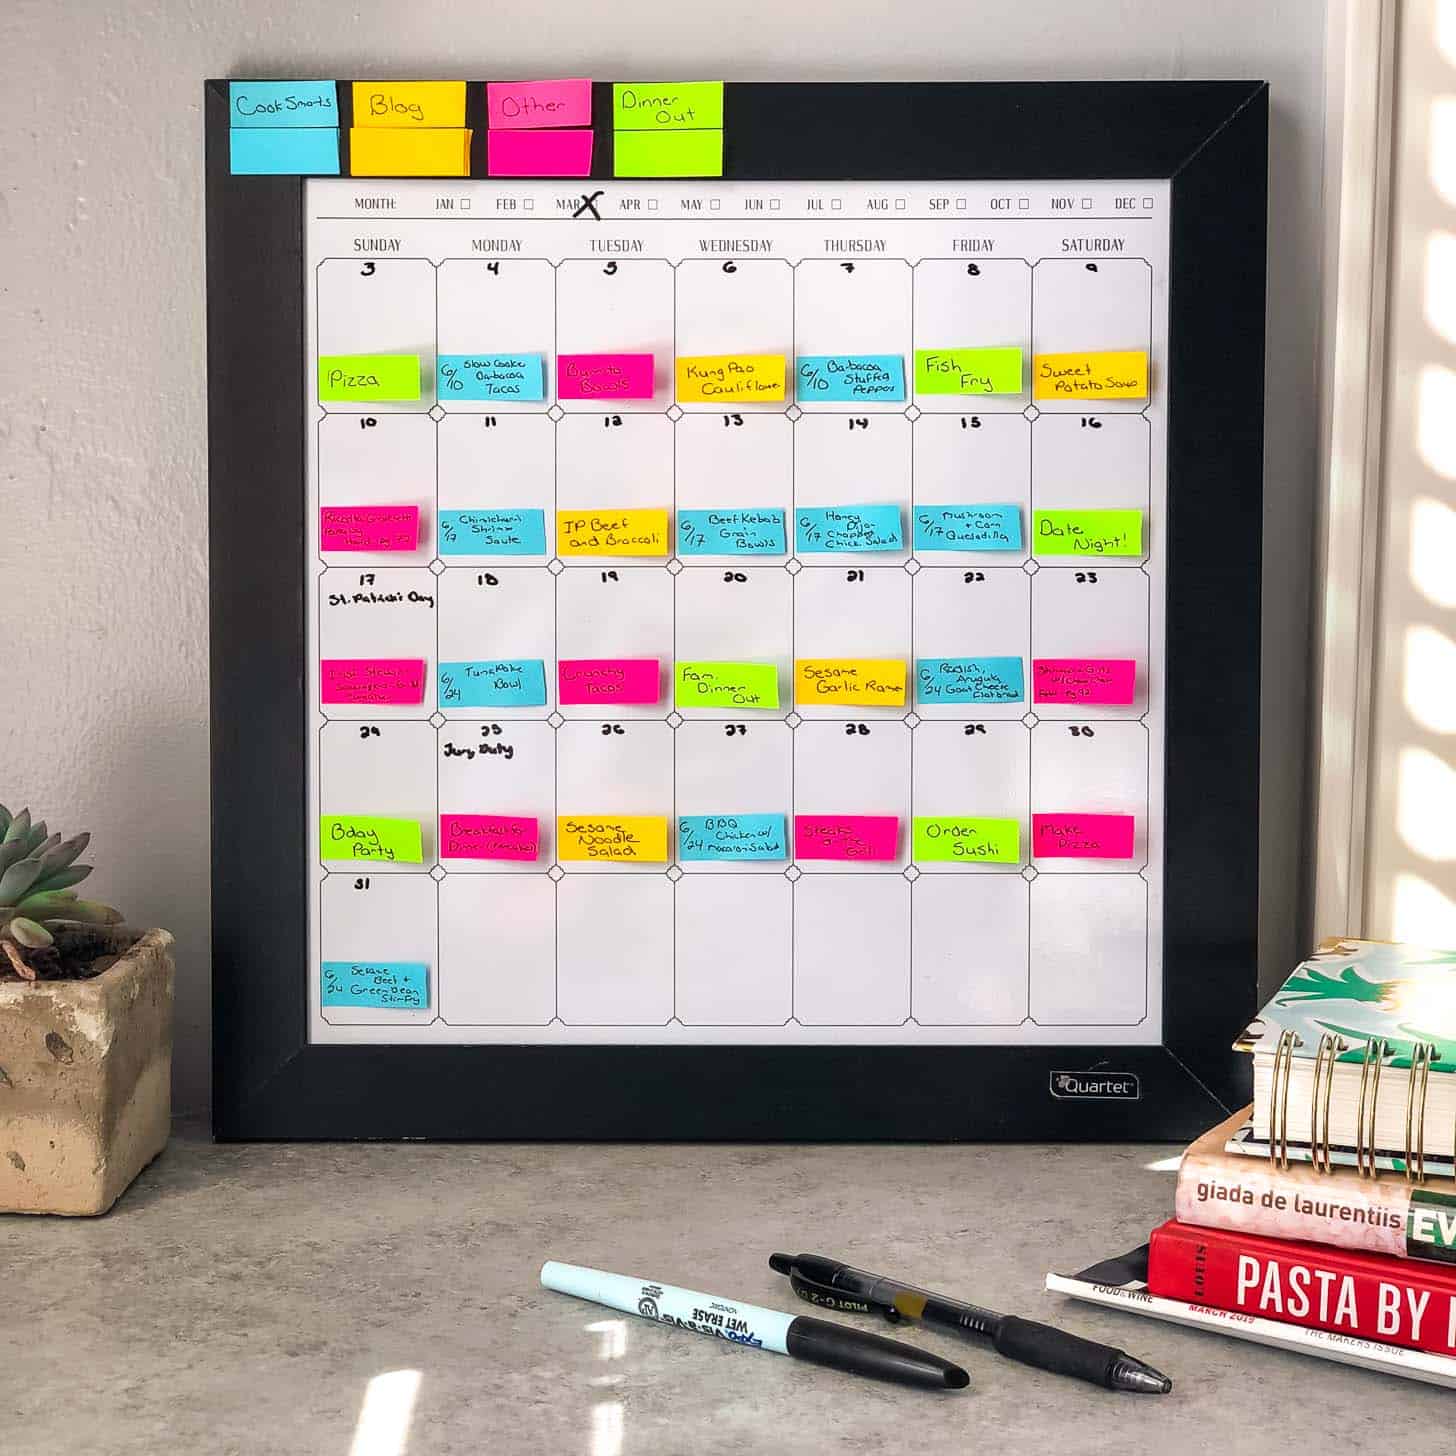 Meal Planning for a Month on a dry erase calendar